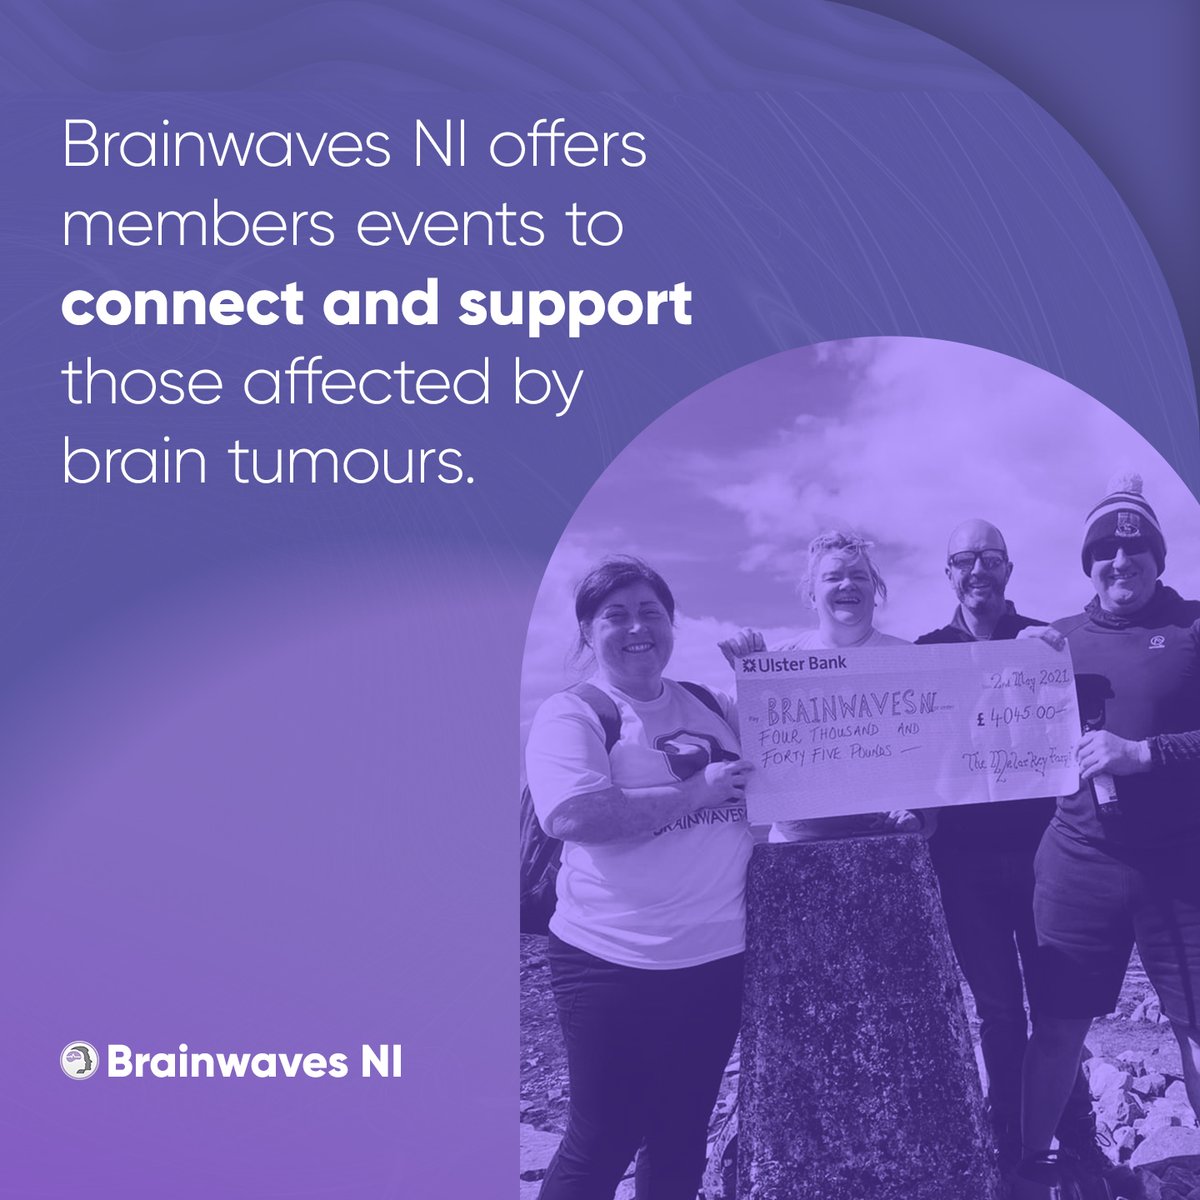 📢 Join Brainwaves NI in their mission to connect and support individuals with Brain Tumours. Discover upcoming events and gatherings that provide valuable support along your journey. 
Learn more on our website: brainwaves-ni.org/events/#Brainw… 
#BrainTumourSupport #Community